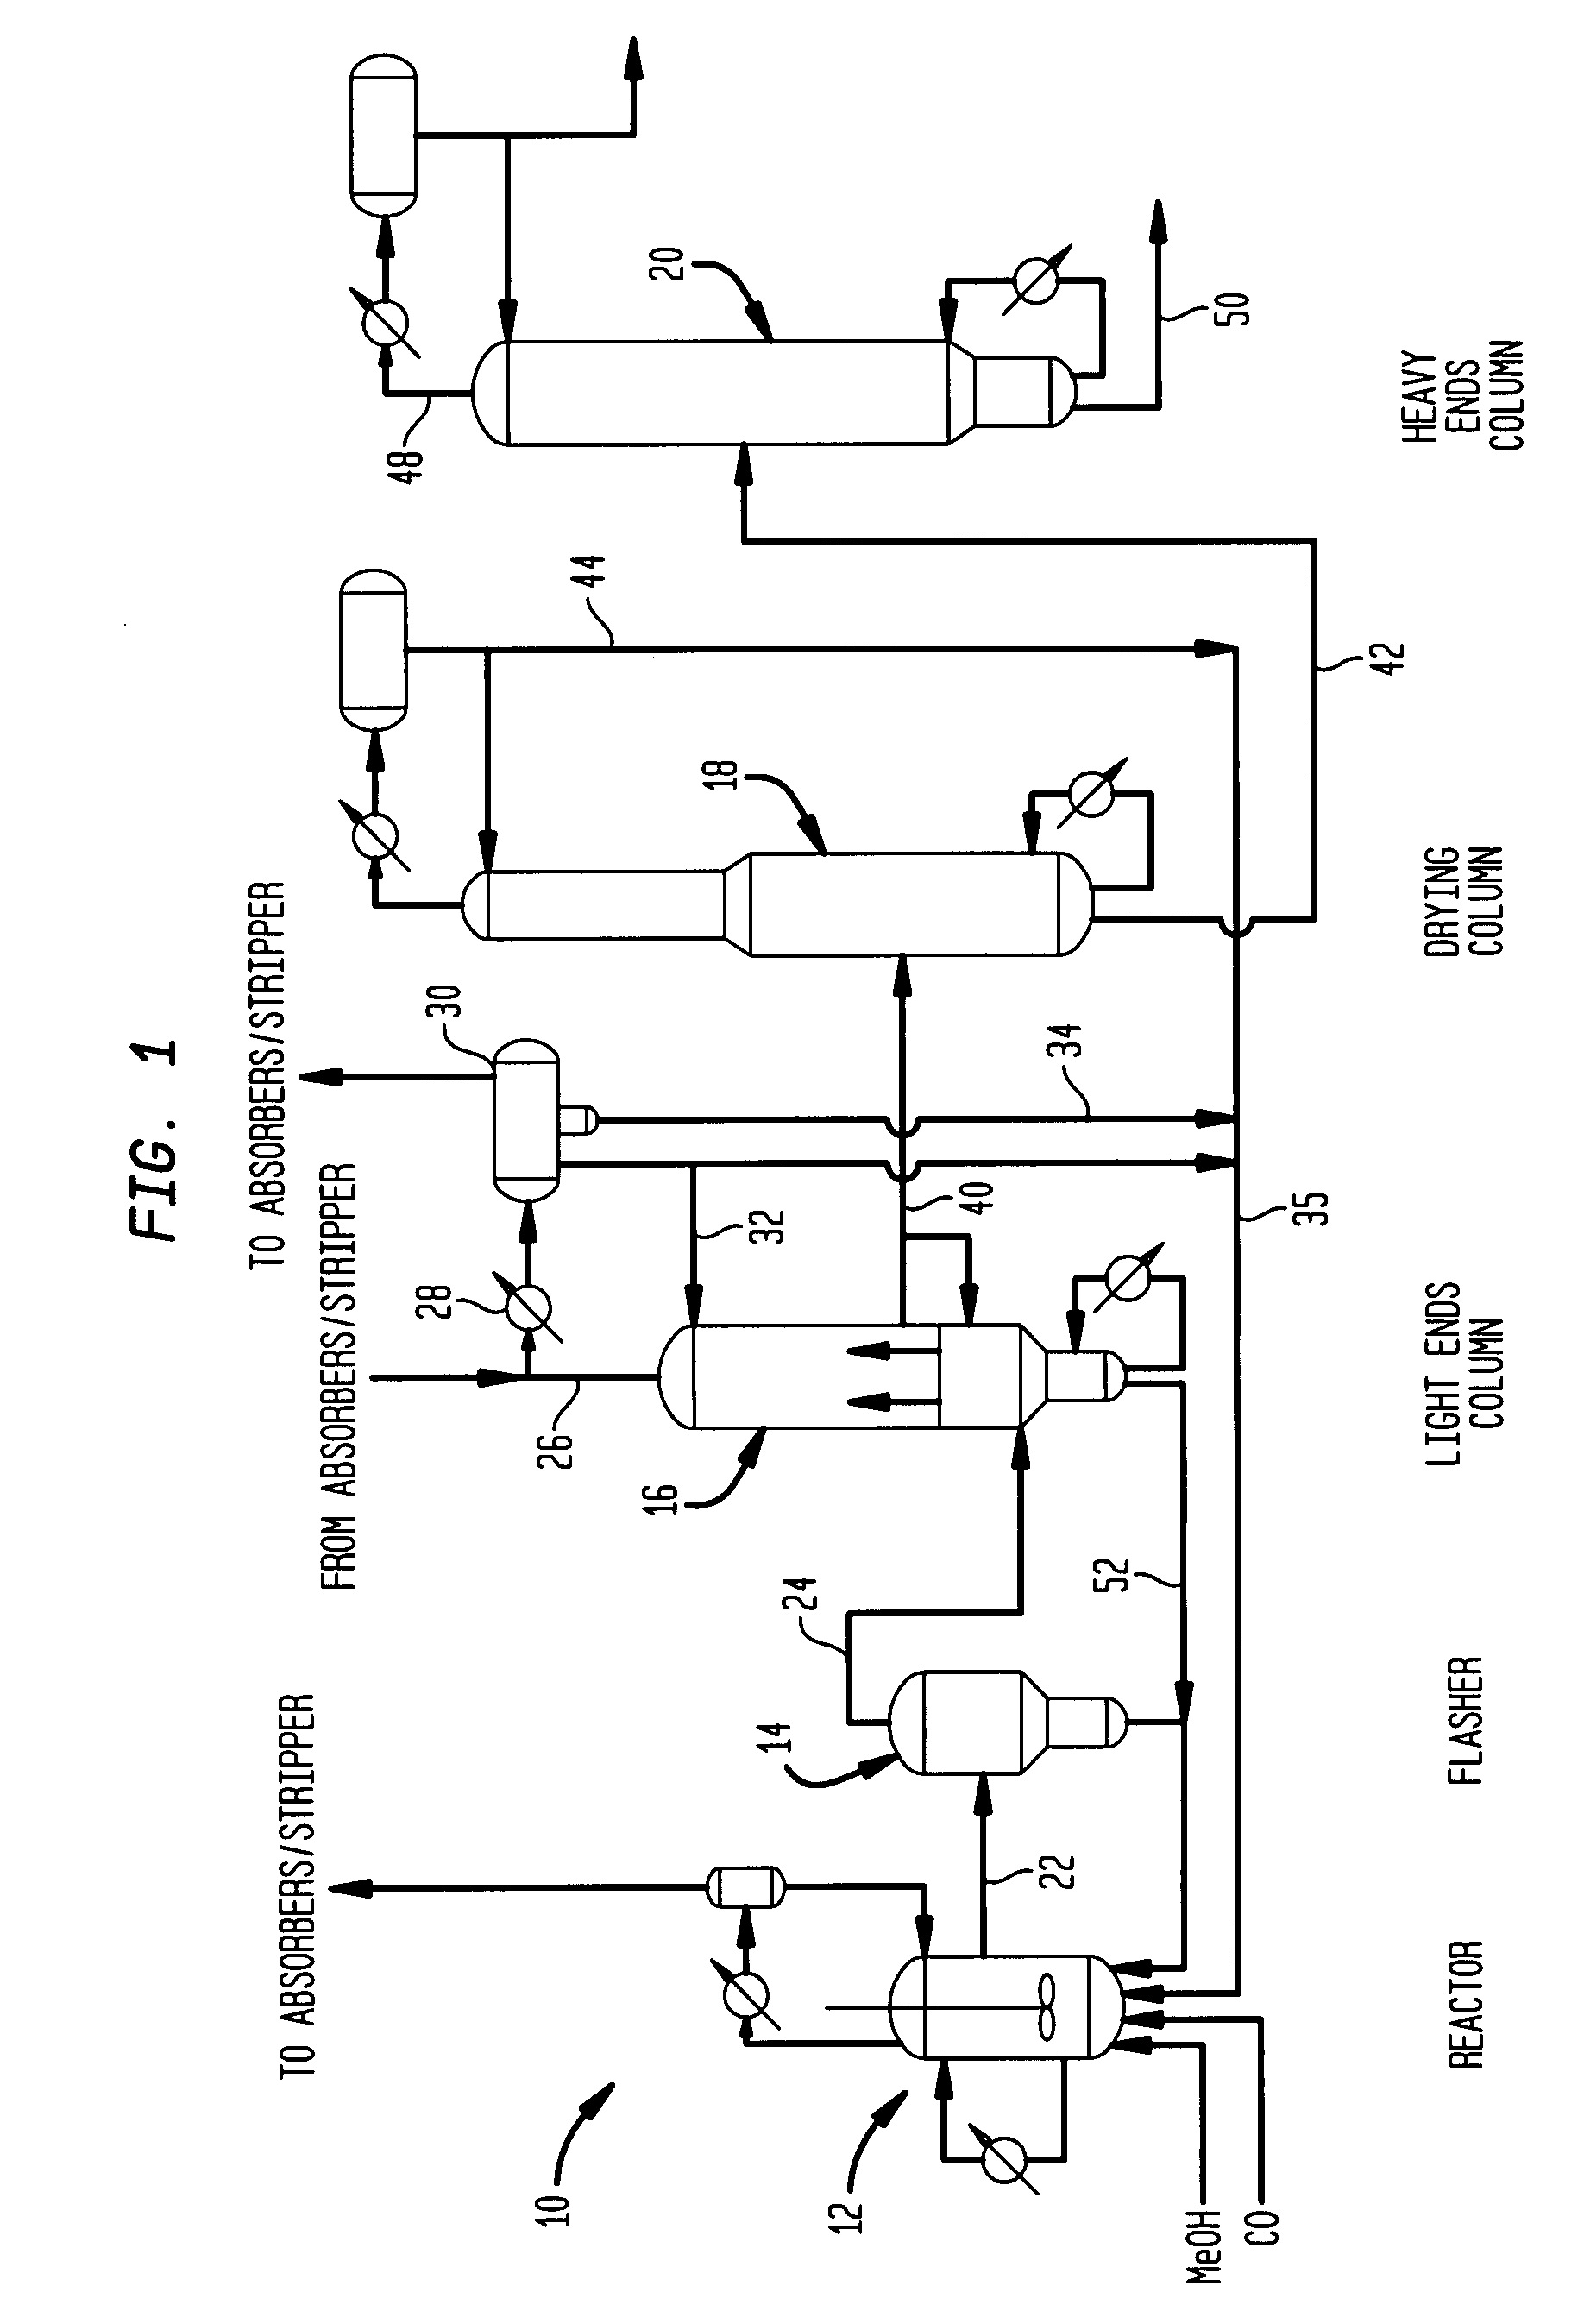 Method and apparatus for making acetic acid with improved purification